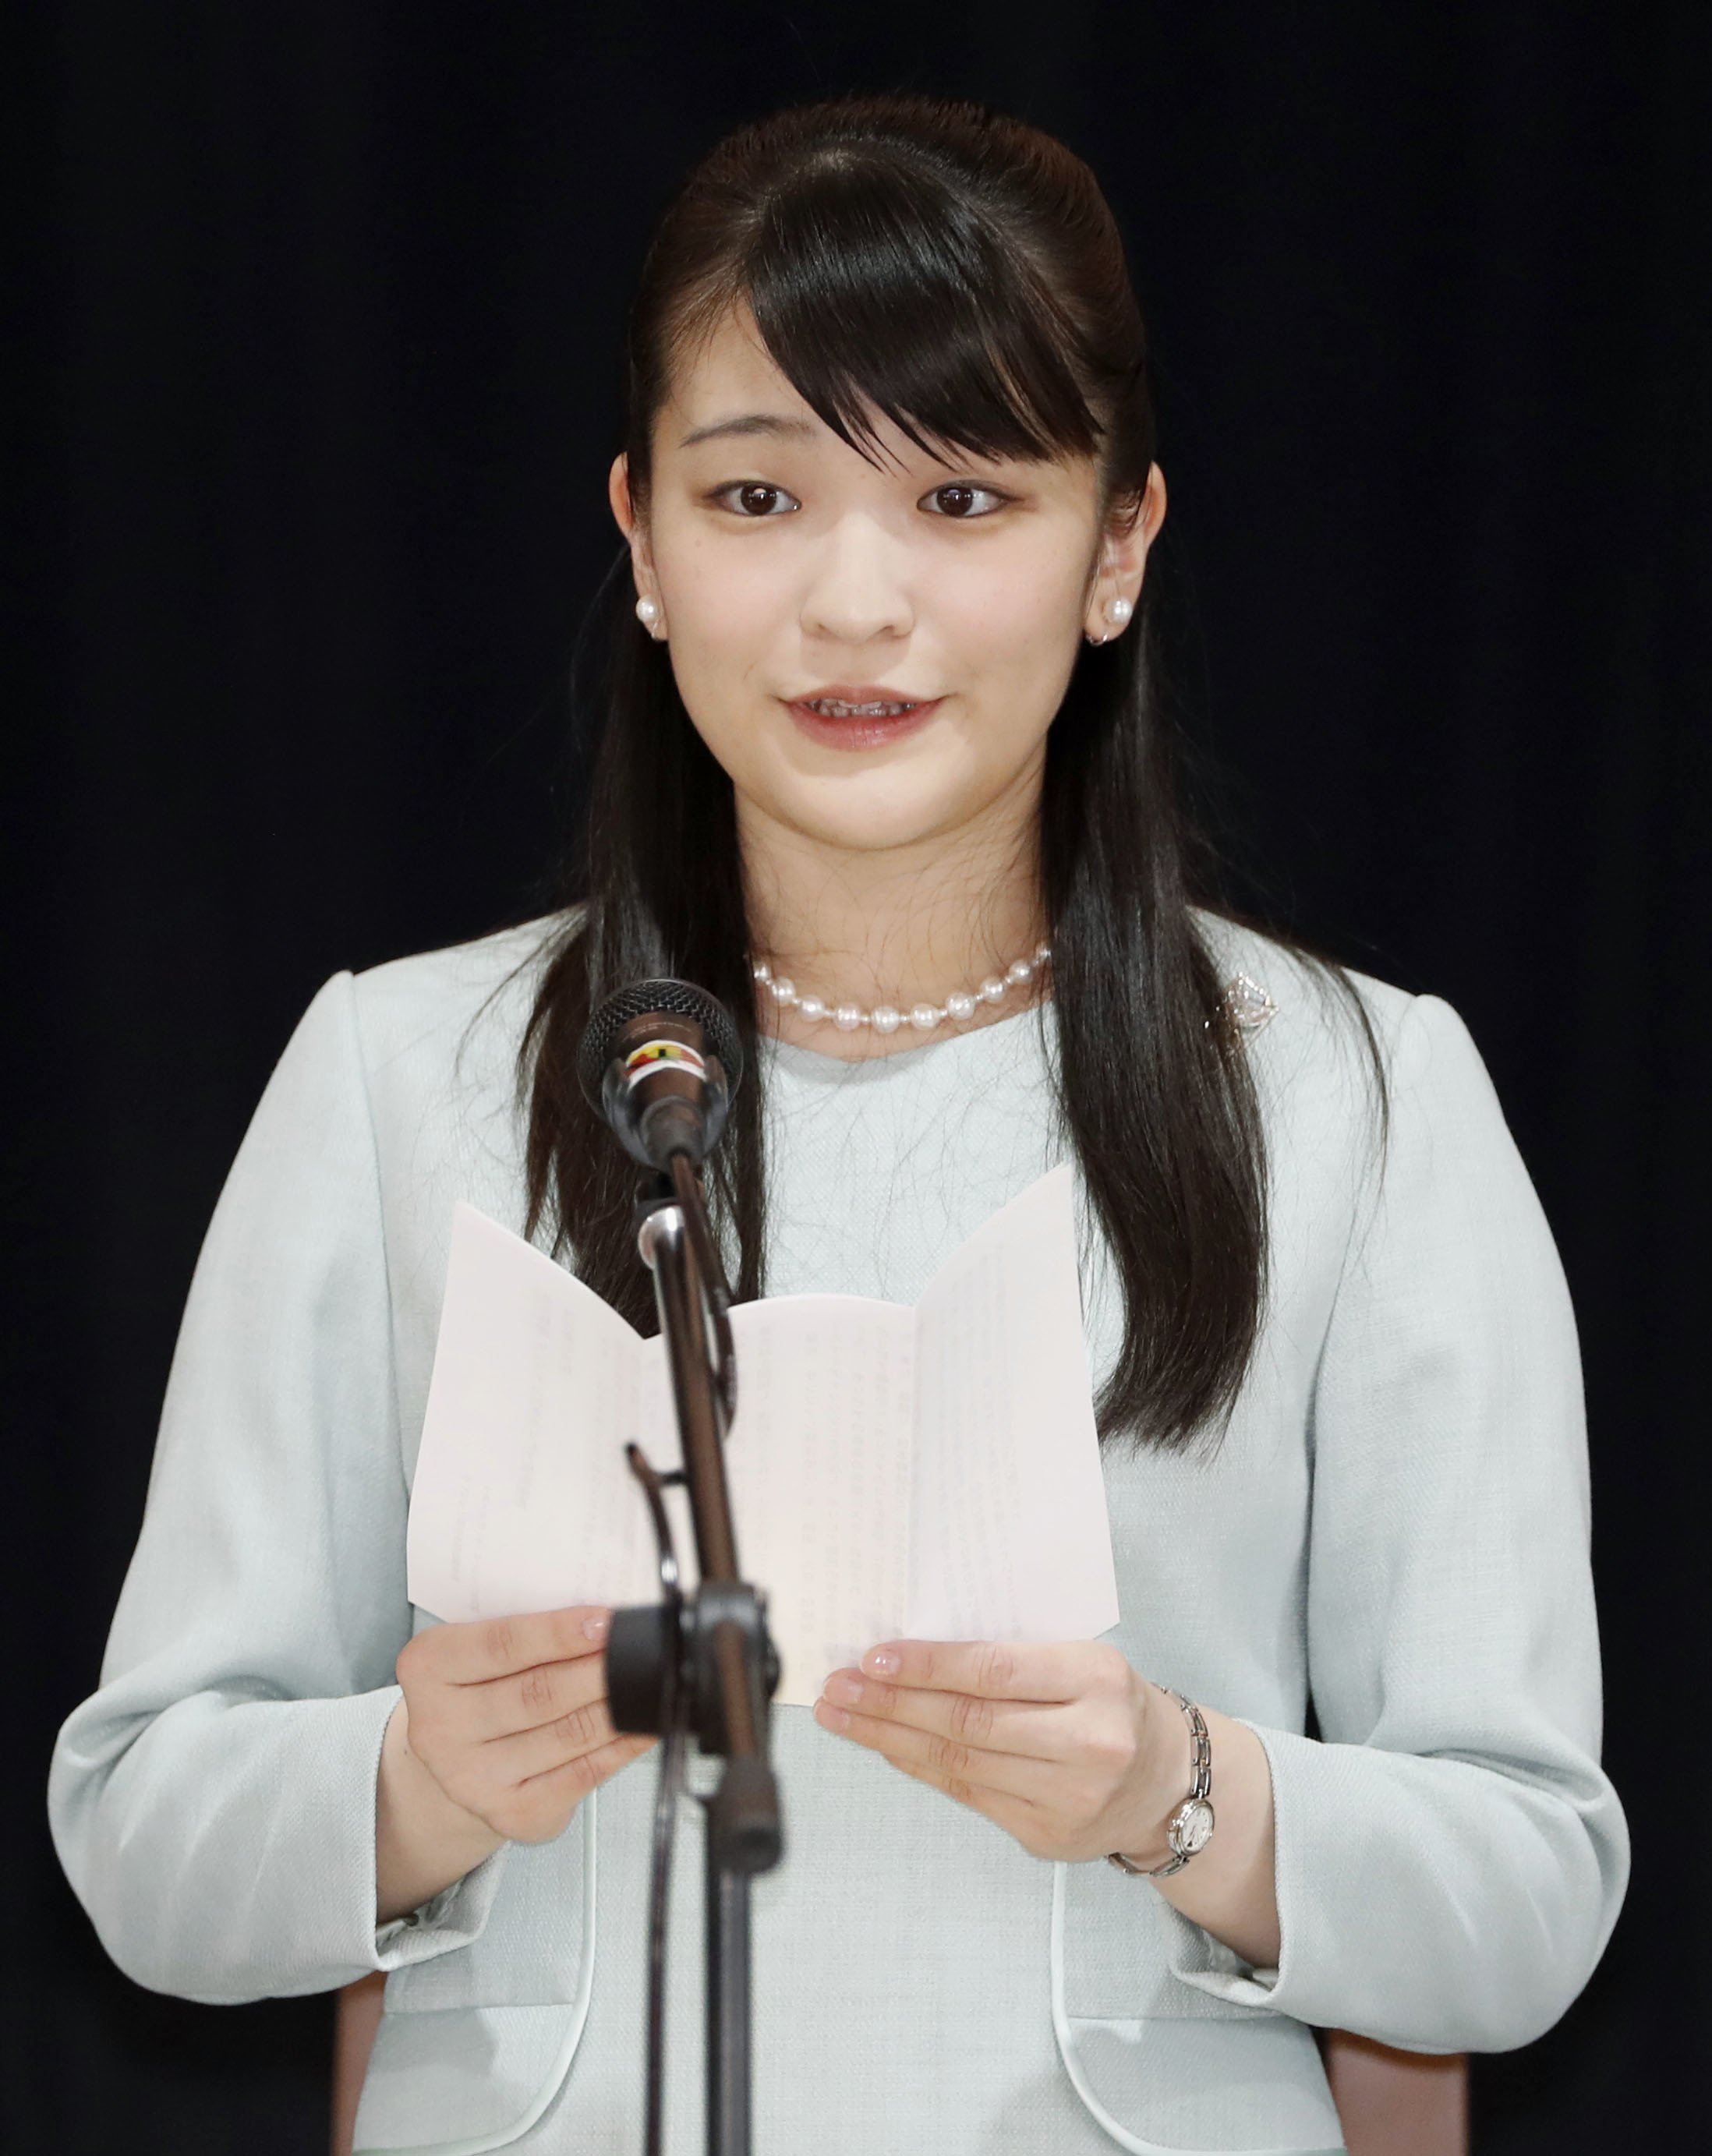 Japanese Princess Mako Gave Up Royal Title And Money To Marry Her Sweetheart ⁠— She Now Works At A